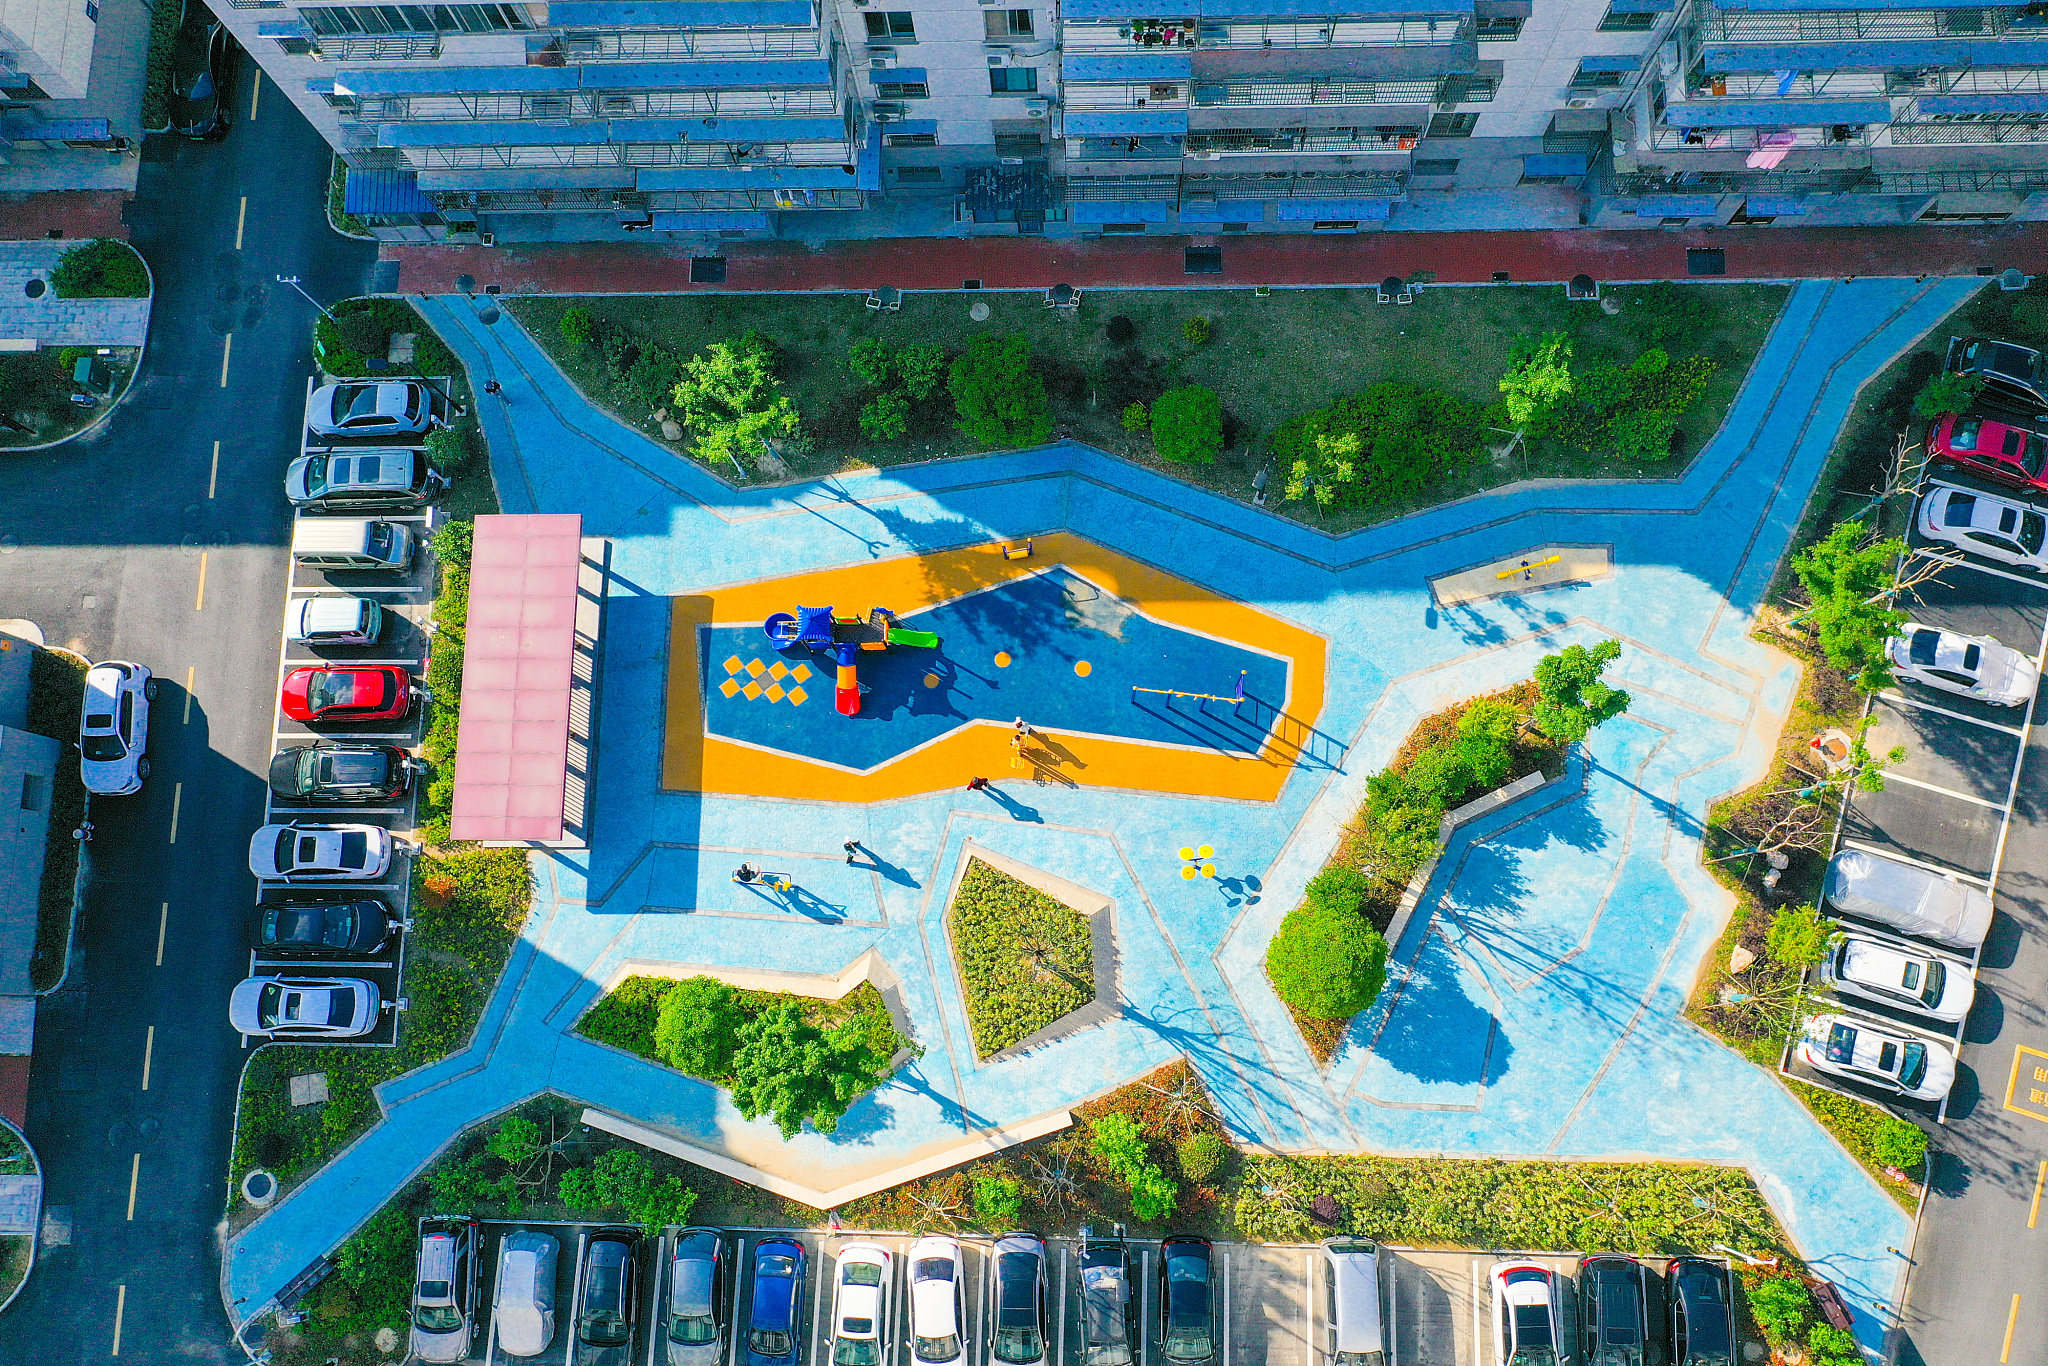 In a renovated old community, residents have fun in a newly built small amusement area, in Jiangsu Province on May 8./ CFP